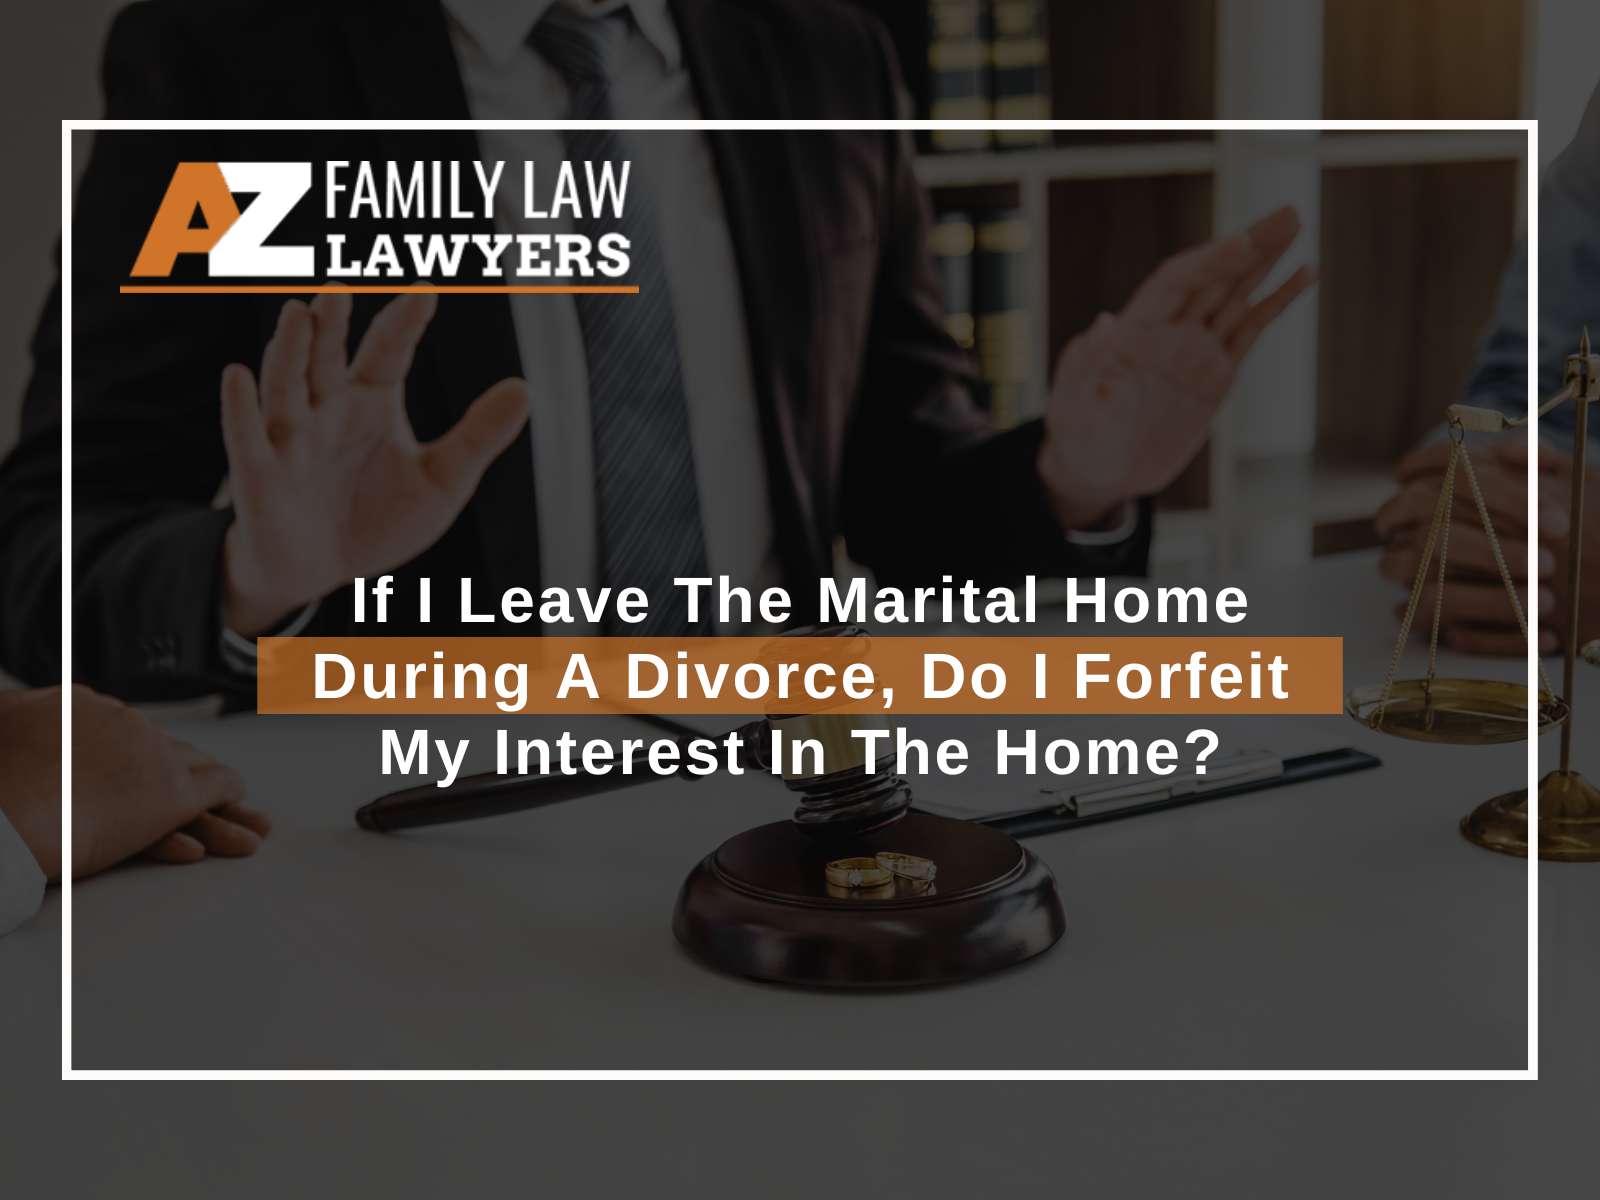 If I Leave The Marital Home During A Divorce, Do I Forfeit My Interest In The Home?